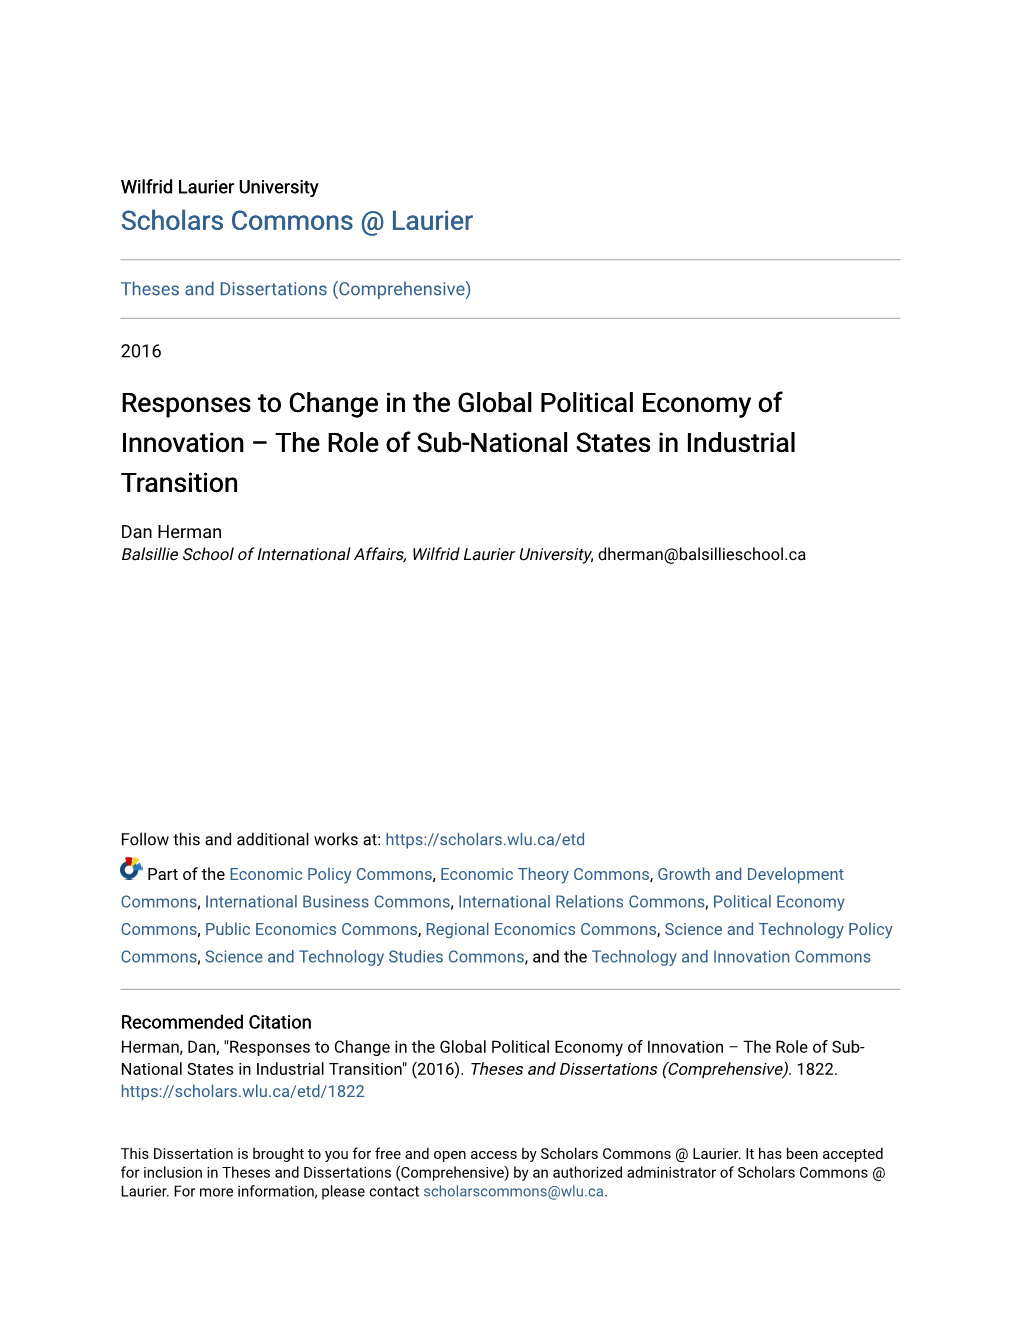 Responses to Change in the Global Political Economy of Innovation – the Role of Sub-National States in Industrial Transition